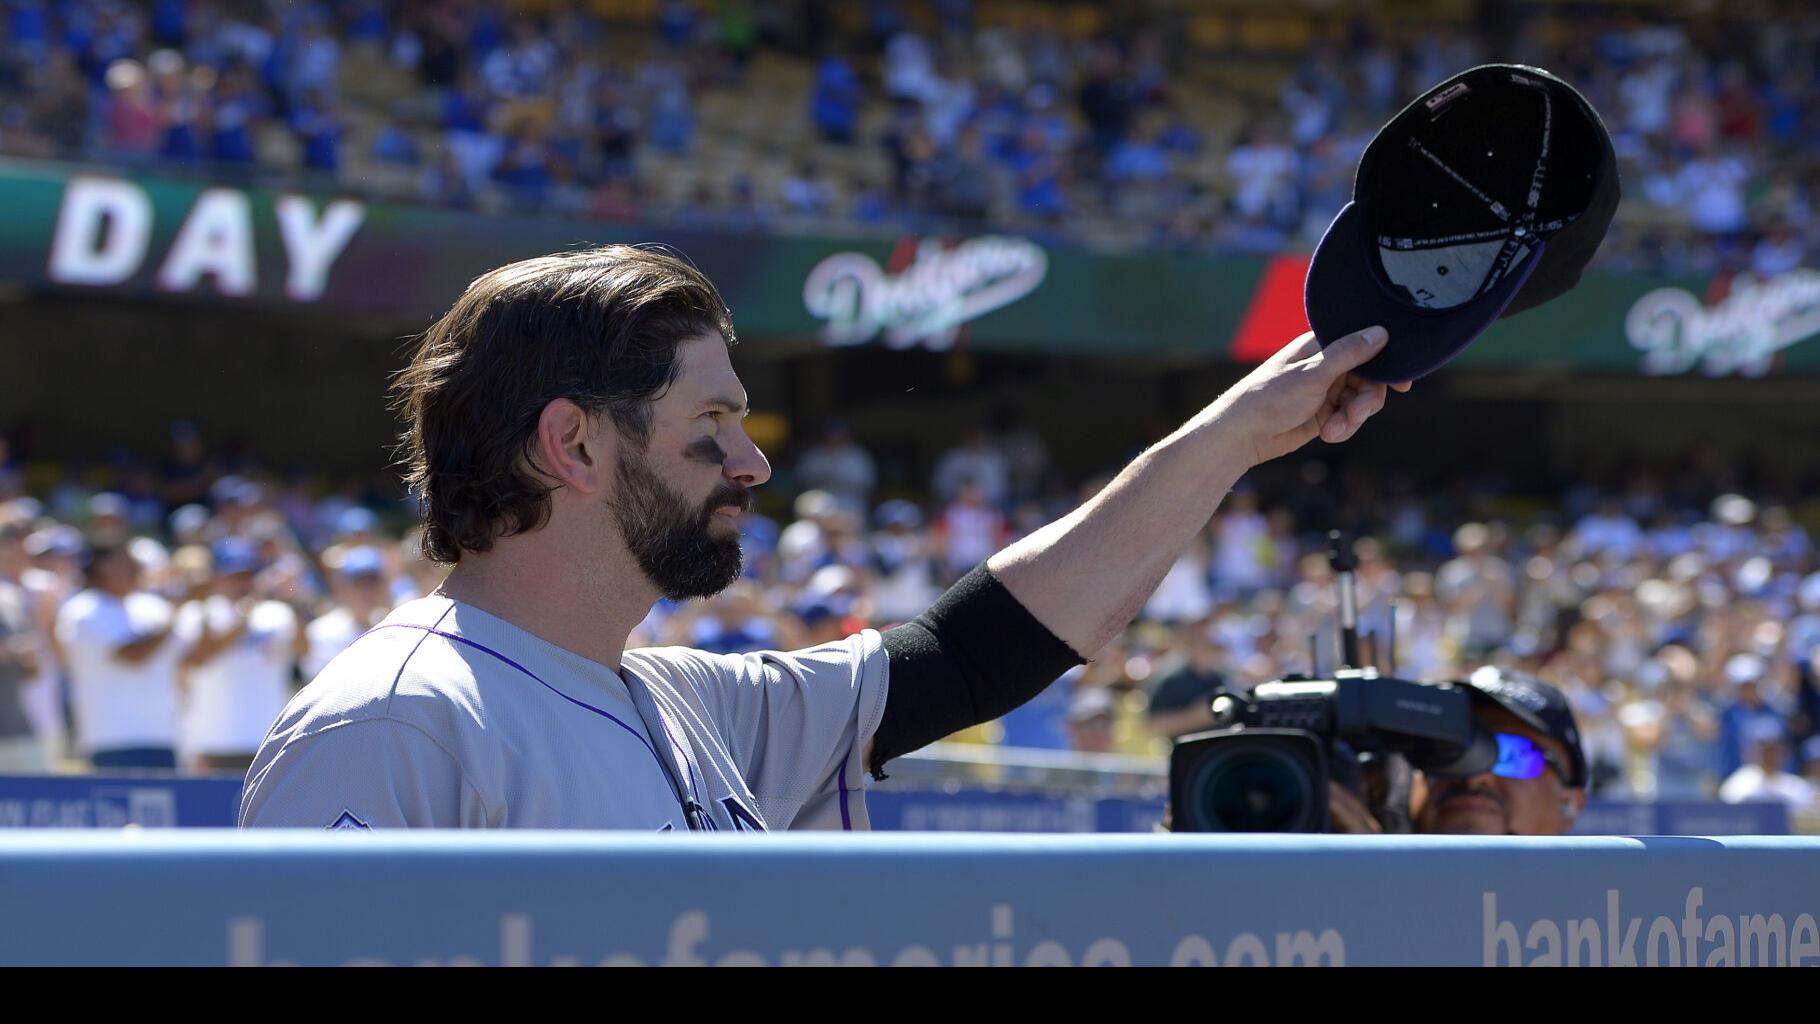 Todd Helton's Baseball Hall of Fame candidacy shunned by Coors Field